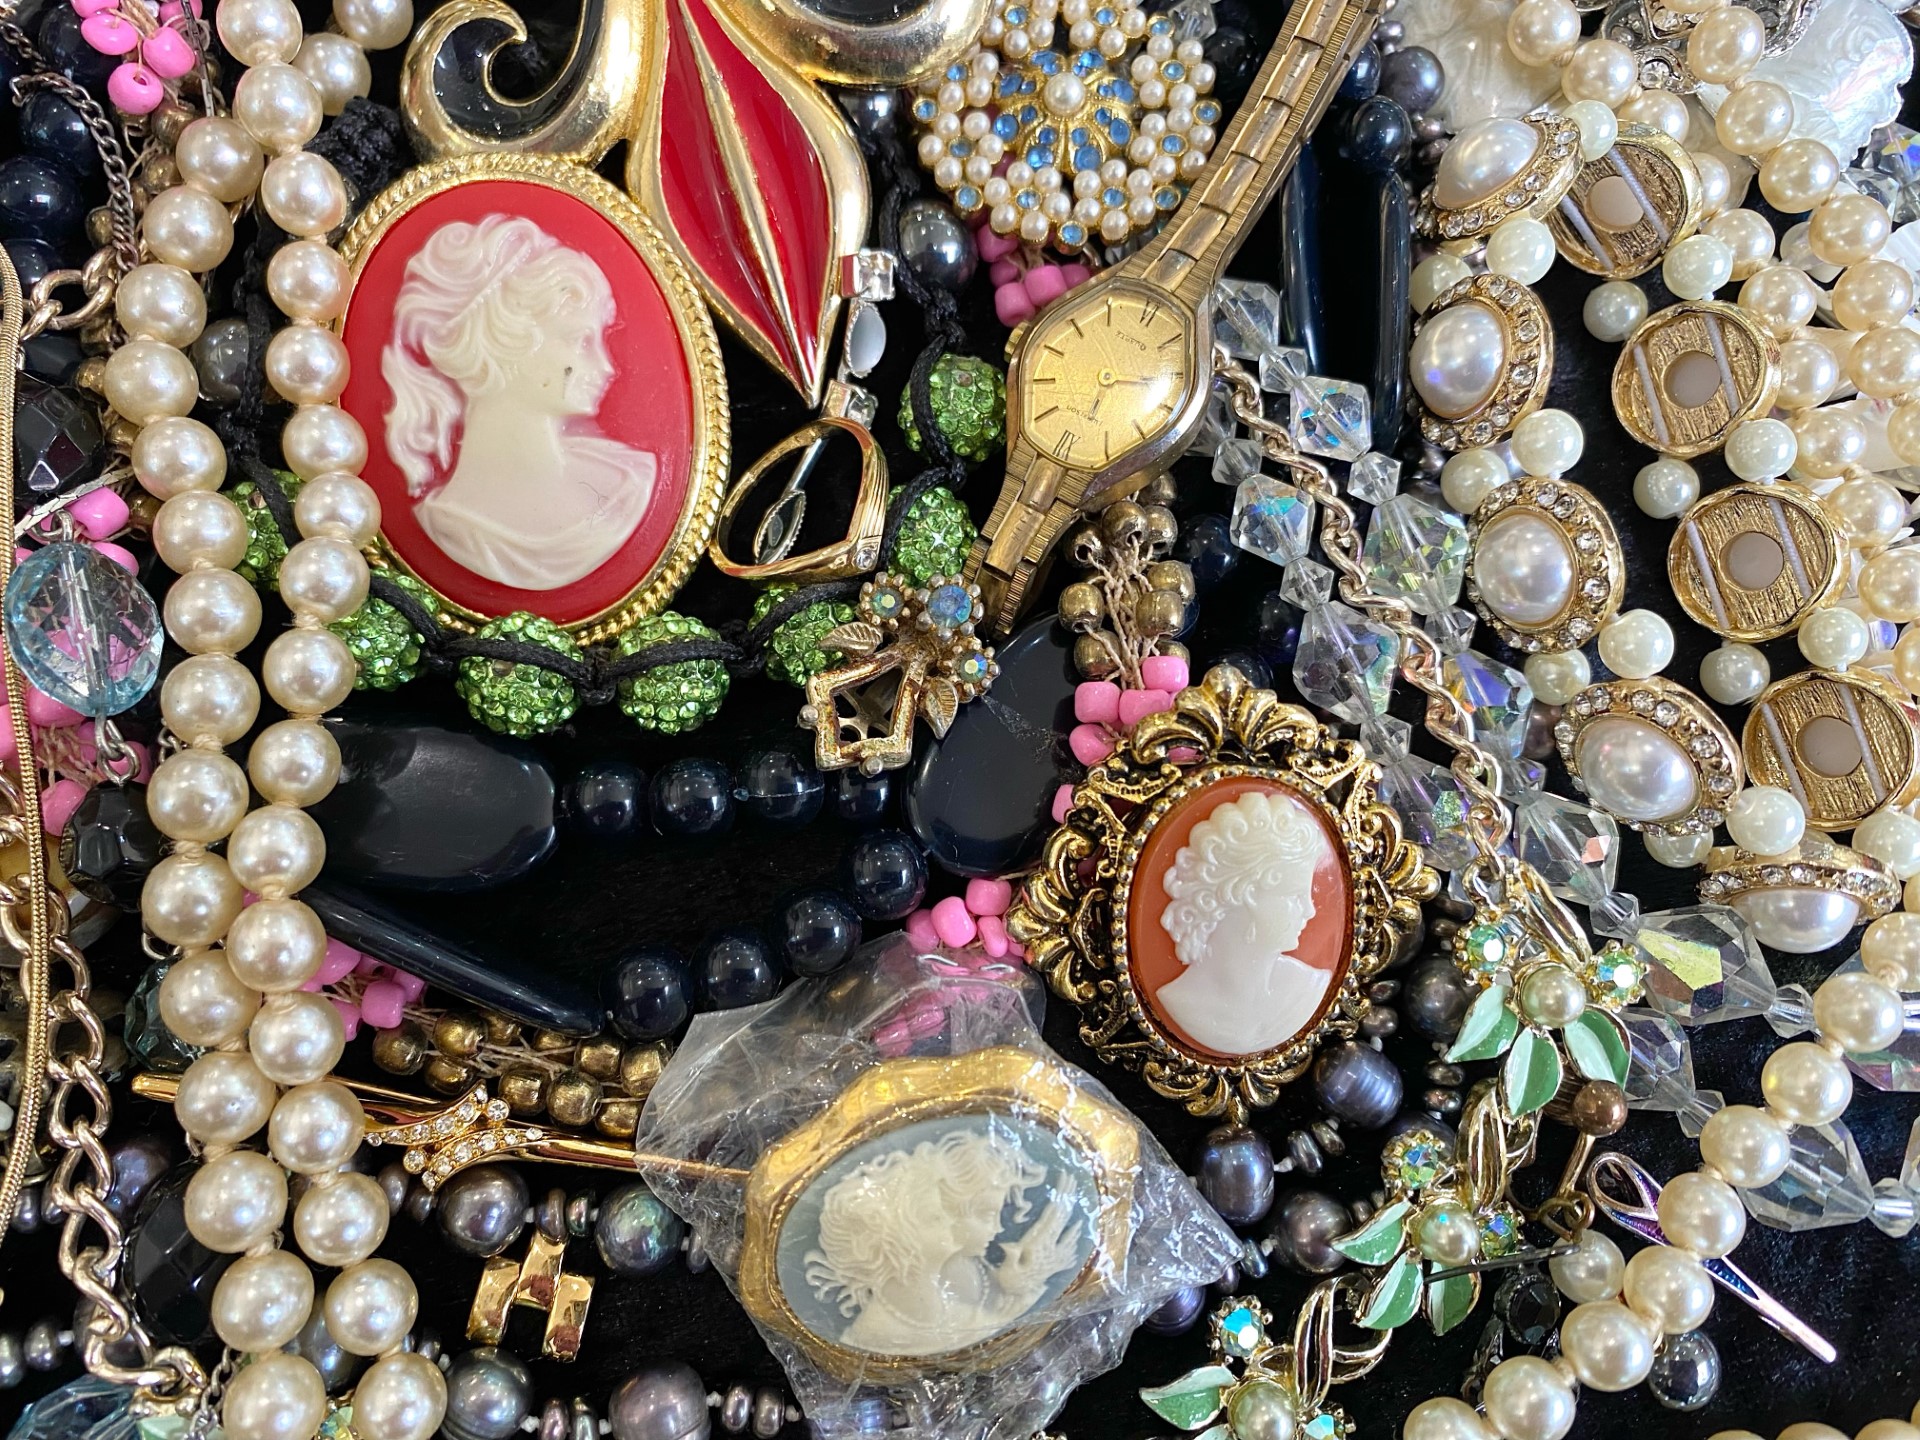 Collection of Vintage Costume Jewellery, comprising brooches, pearls, bangles, beads, watches, etc. - Image 2 of 4